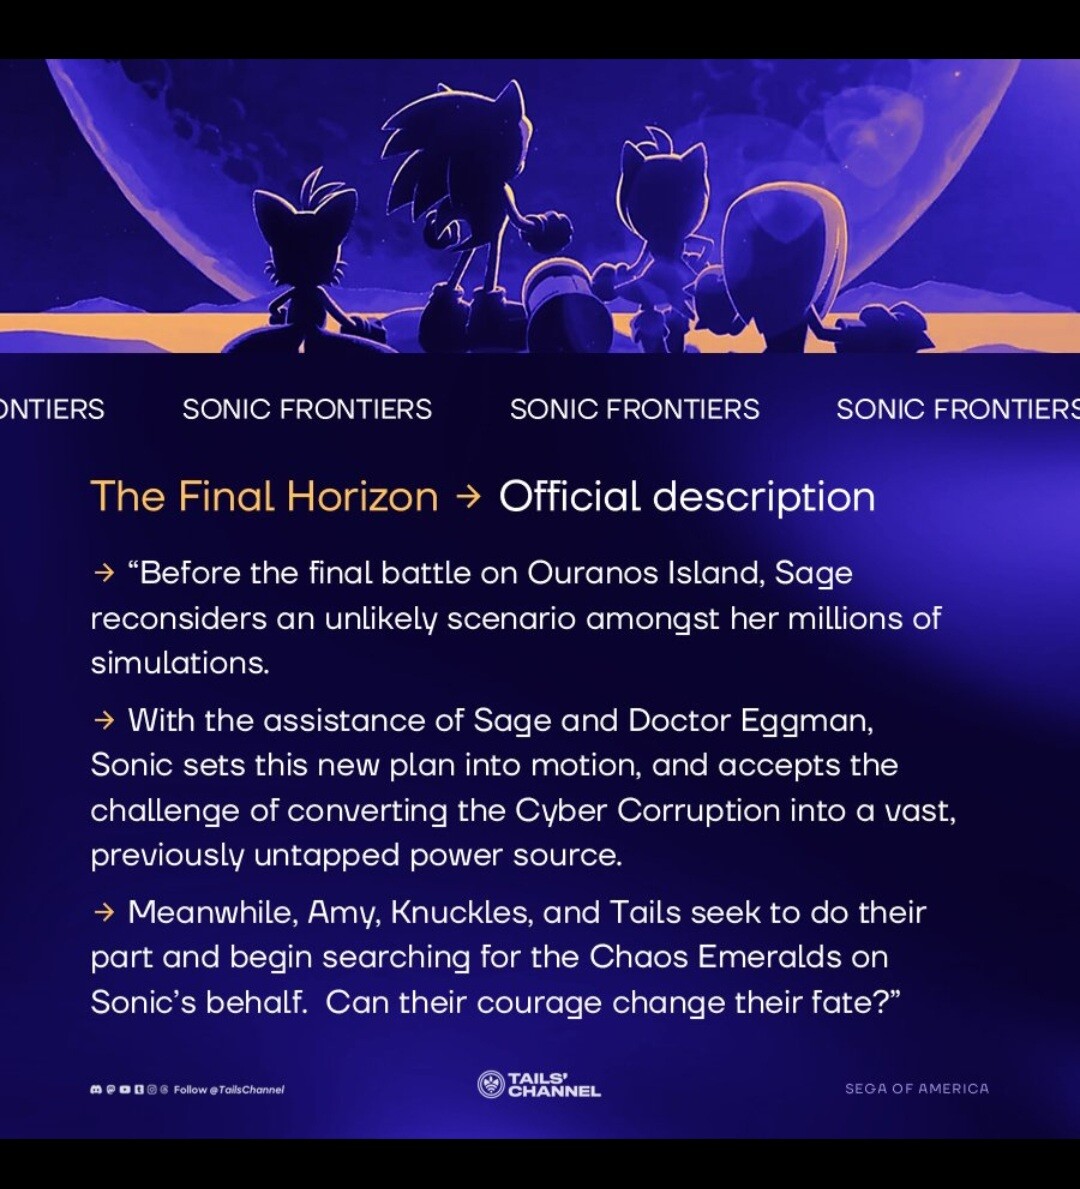 Sonic Frontiers DLC release date announced with plans for two more